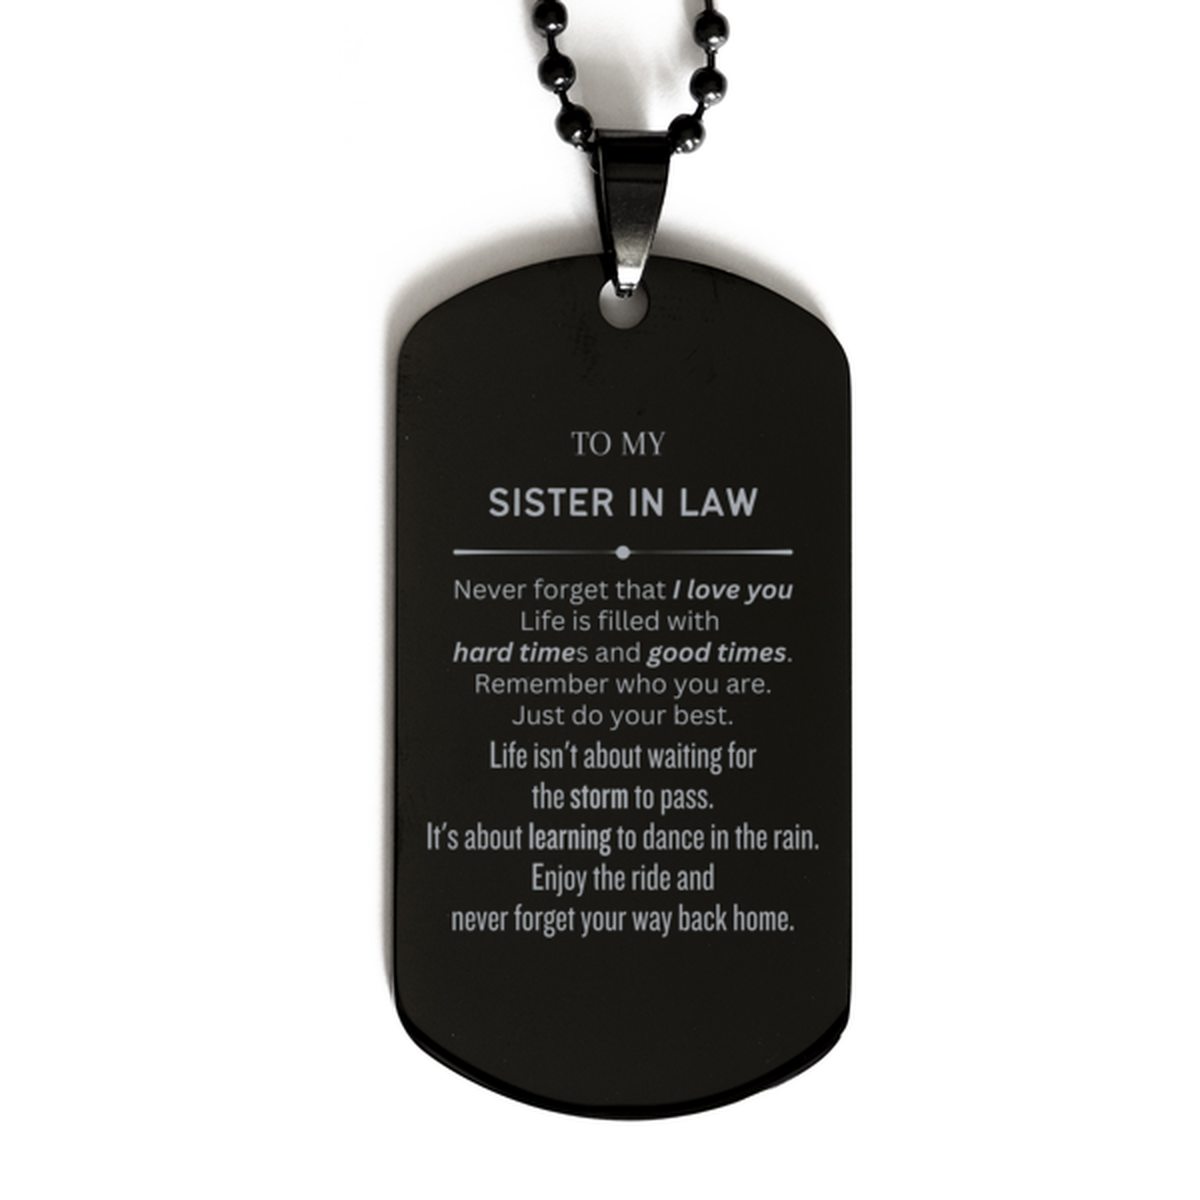 Christmas Sister In Law Black Dog Tag Gifts, To My Sister In Law Birthday Thank You Gifts For Sister In Law, Graduation Unique Gifts For Sister In Law To My Sister In Law Never forget that I love you life is filled with hard times and good times. Remember